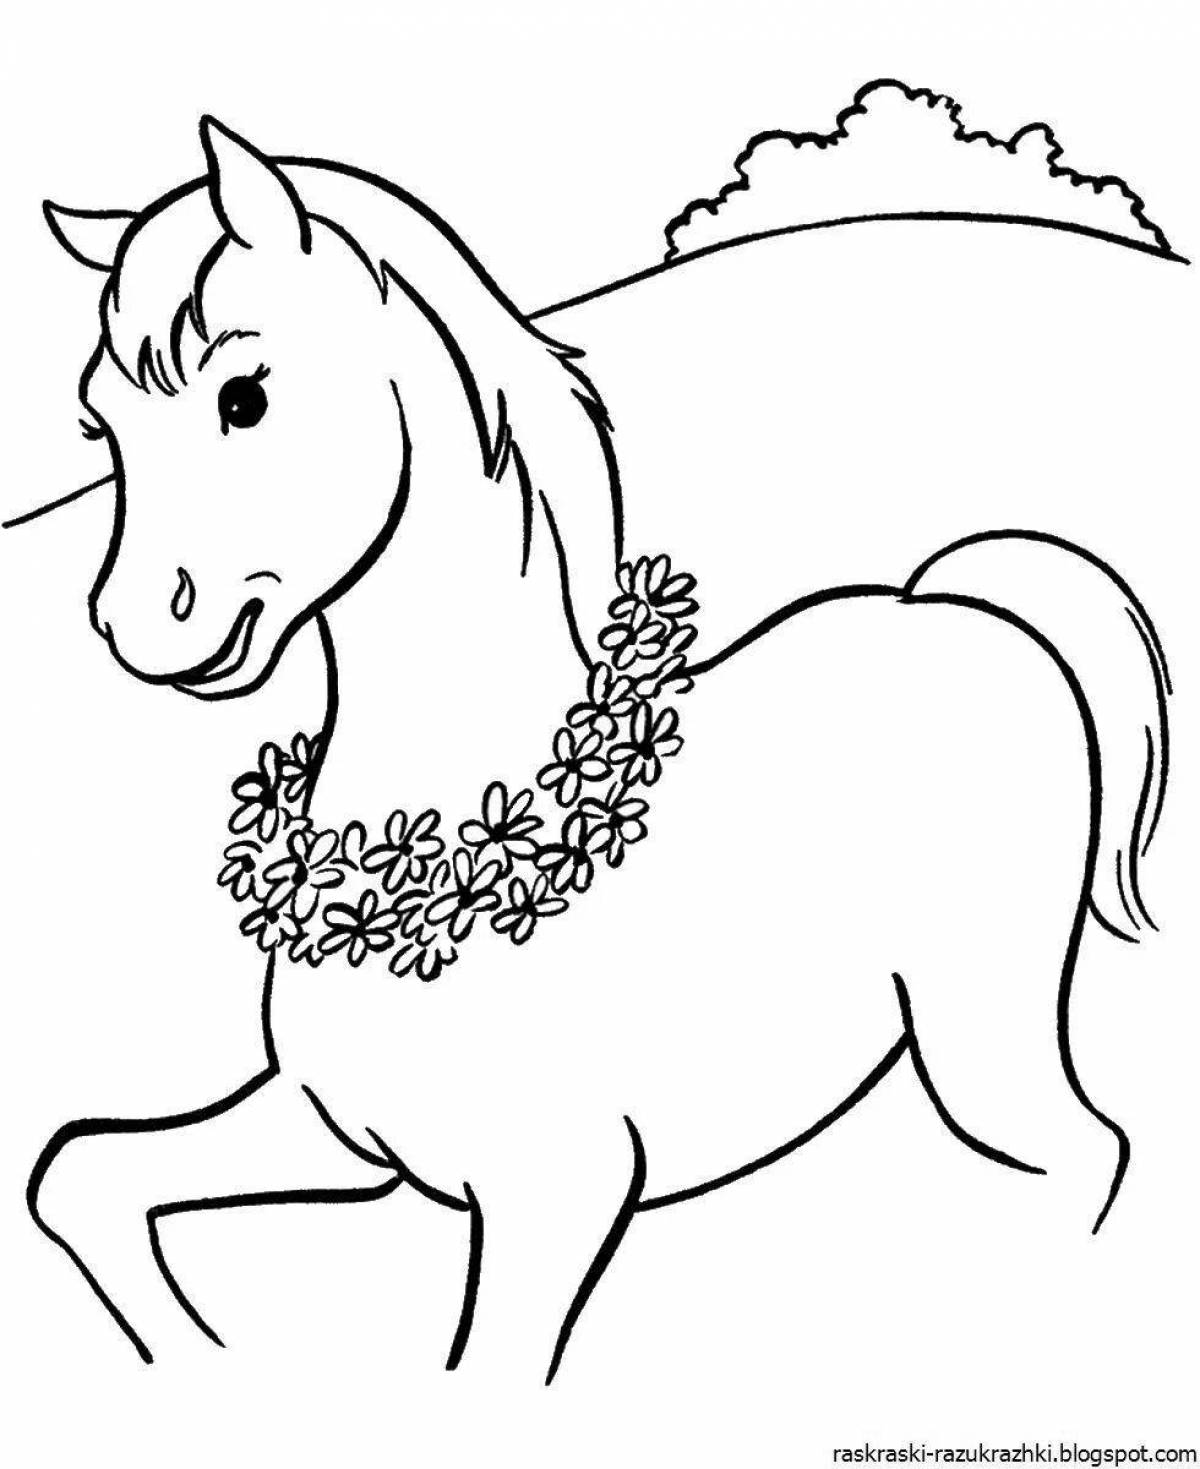 Gorgeous Ygggo Girl Coloring Page